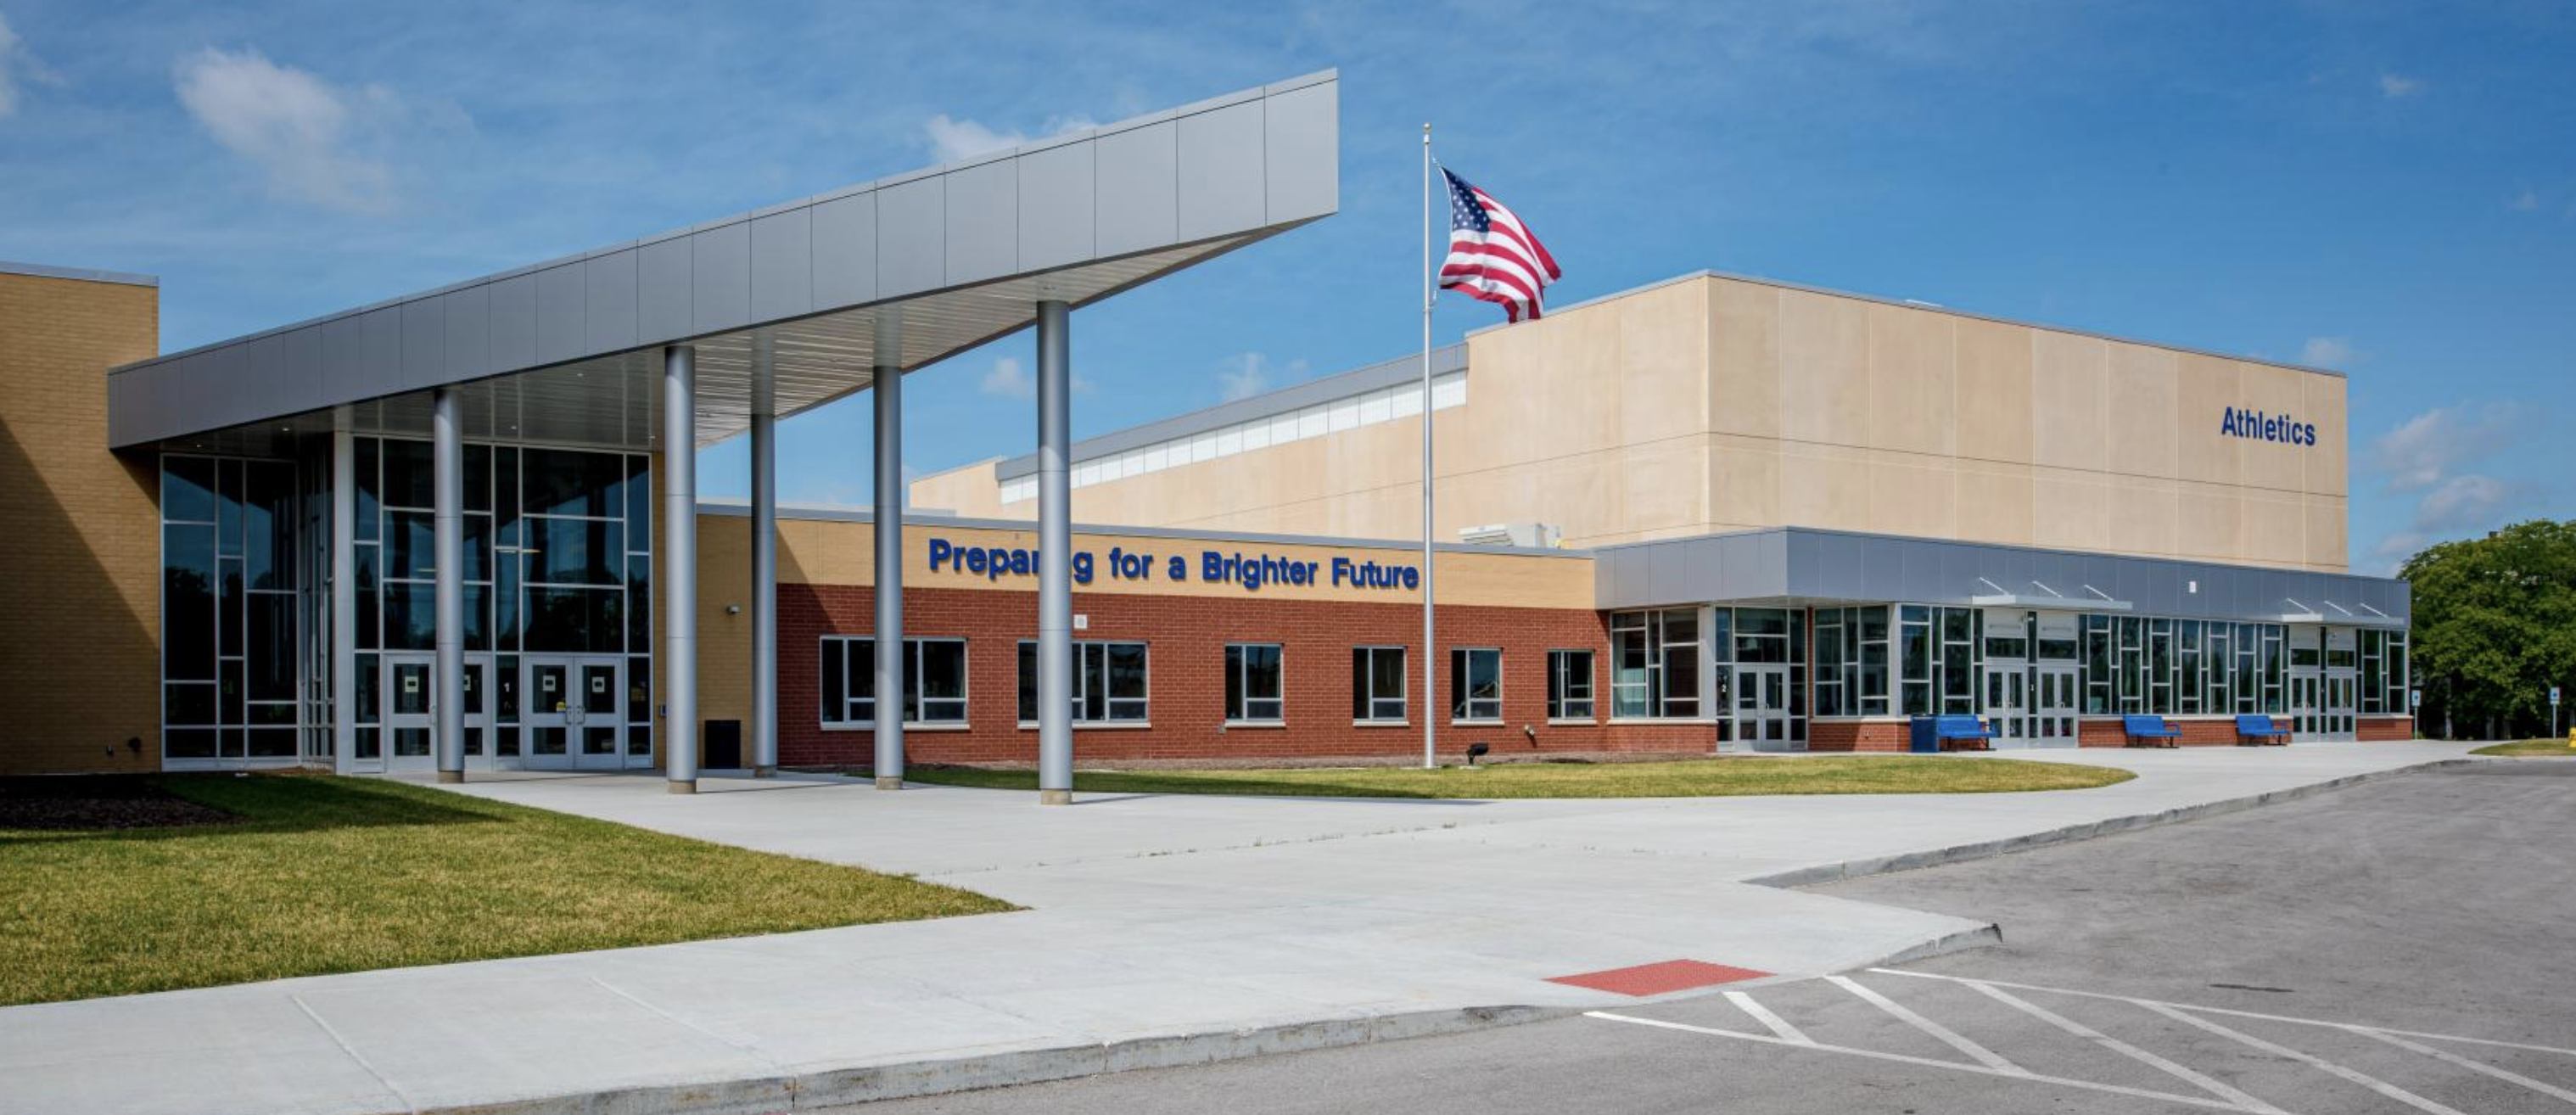 Middle school facility